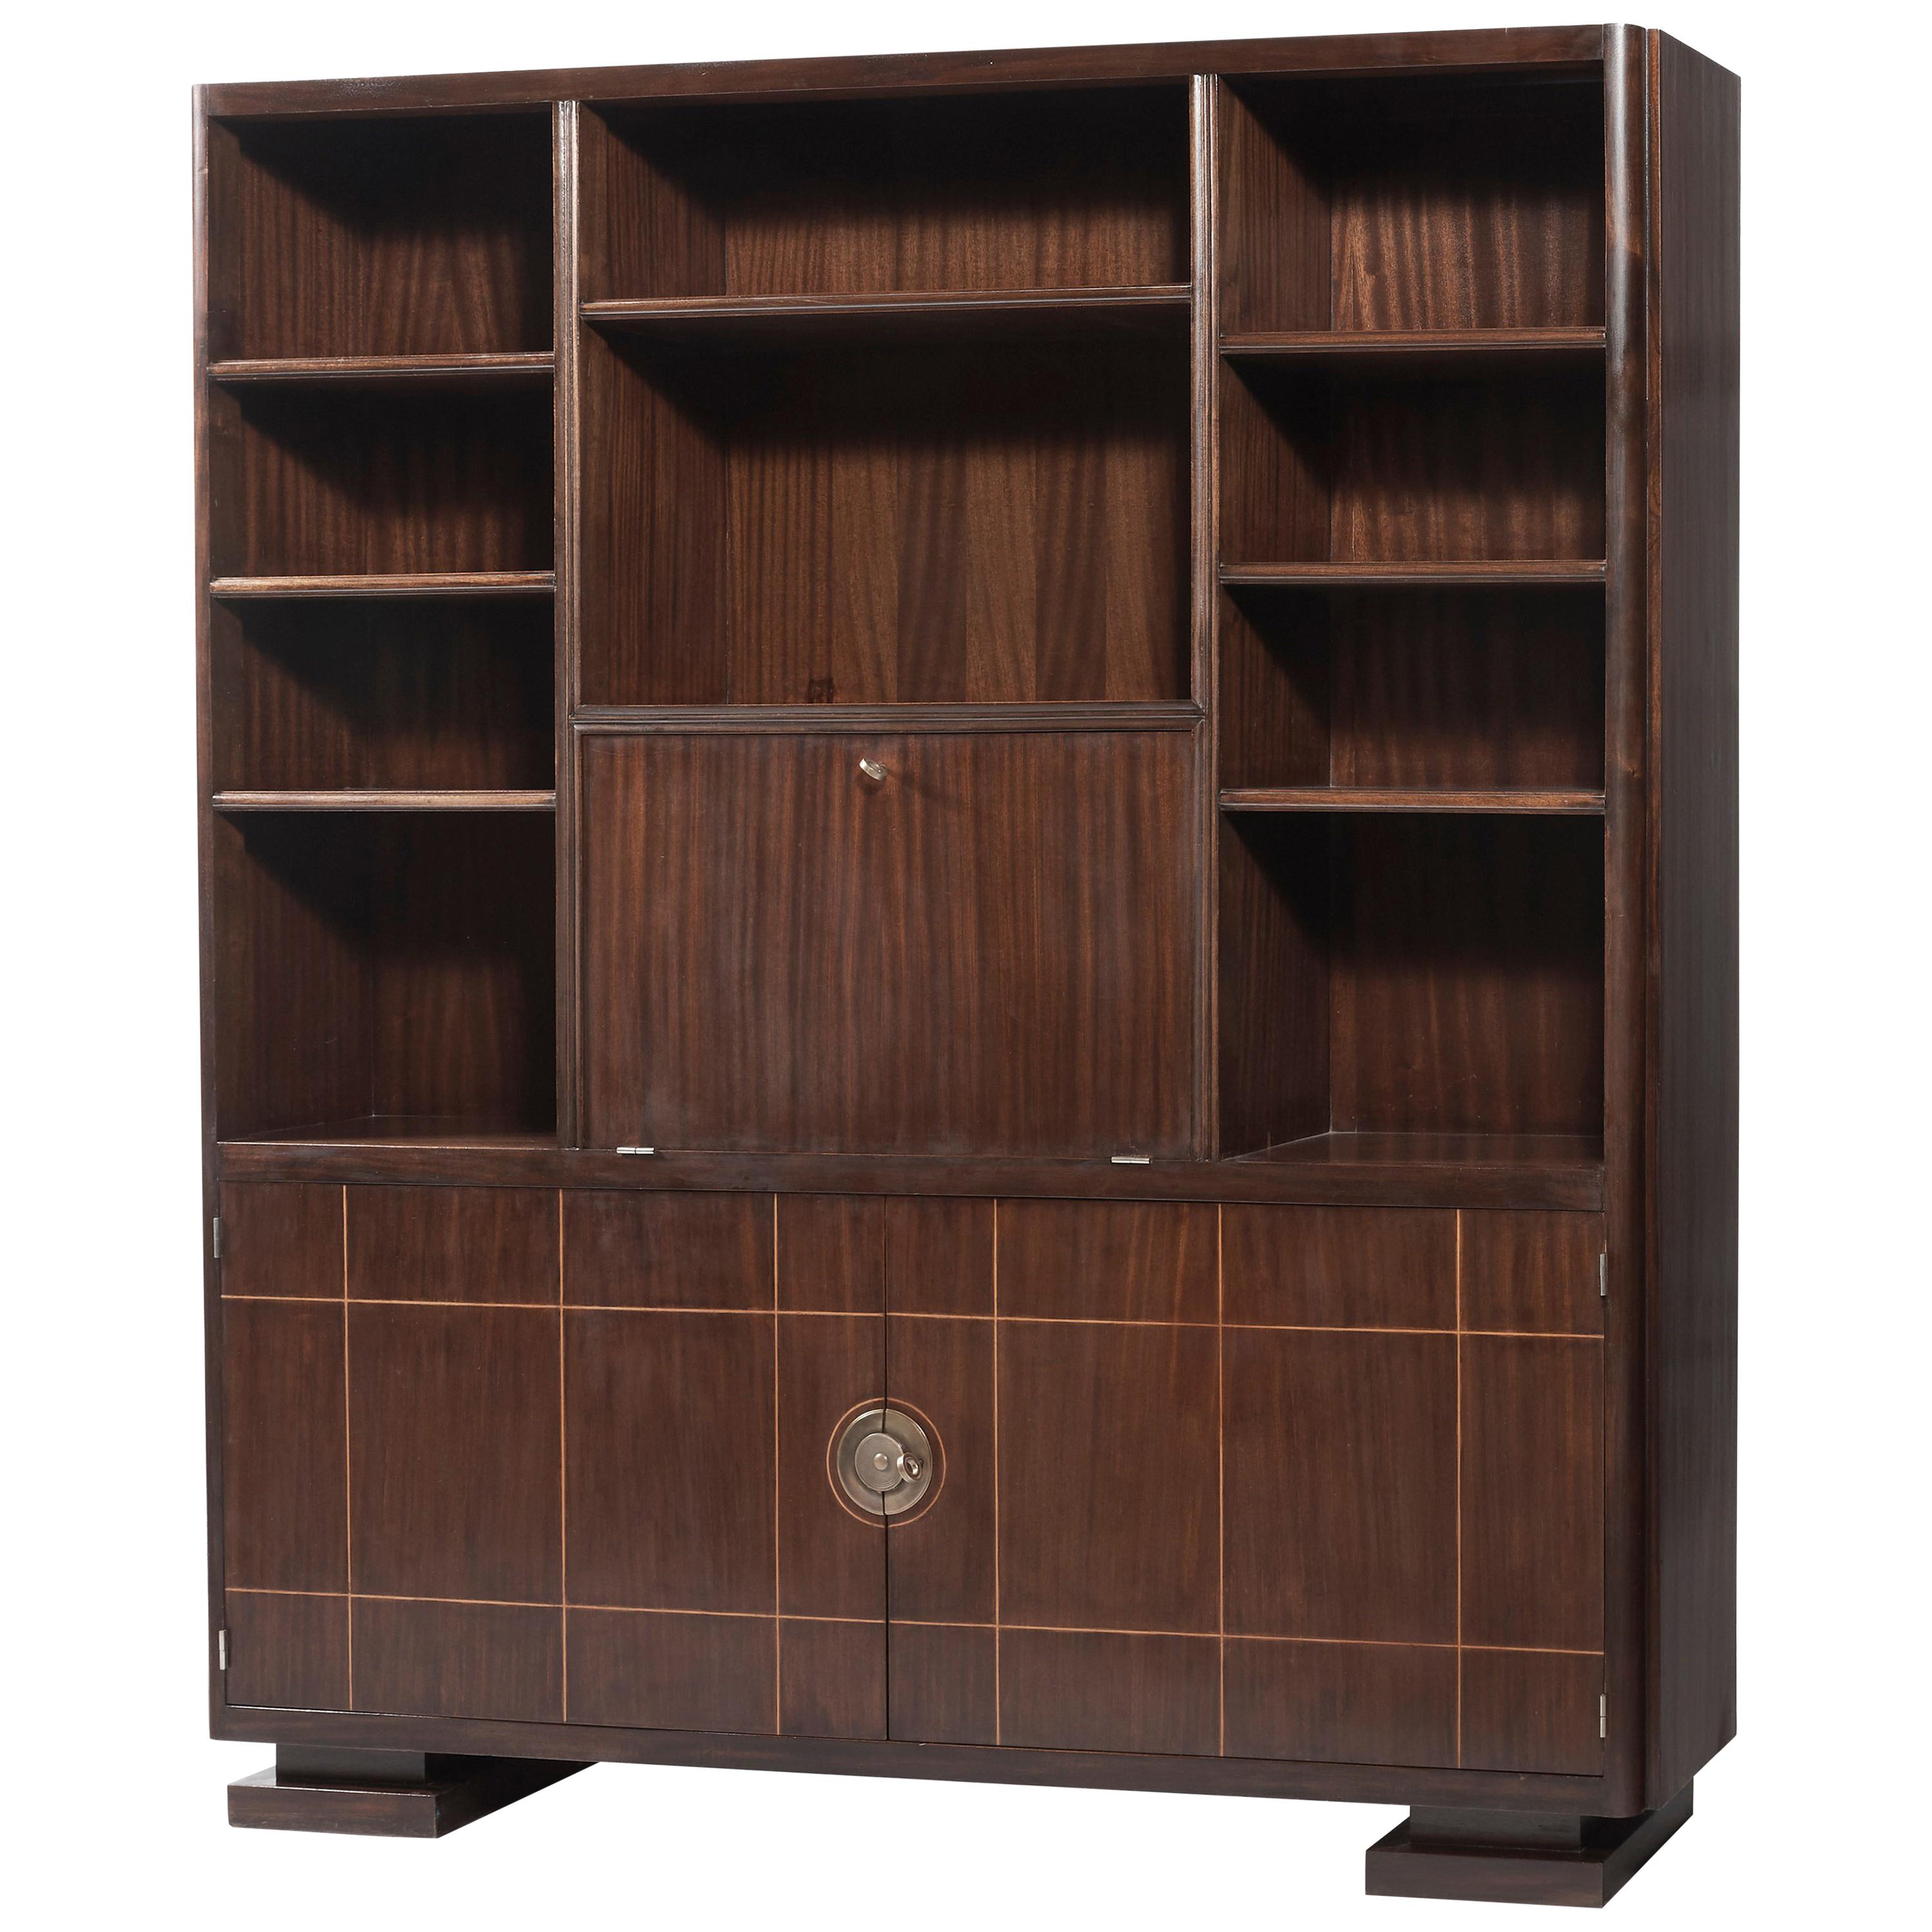 Dominique, Rosewood Cabinet with Open Compartments, circa 1949